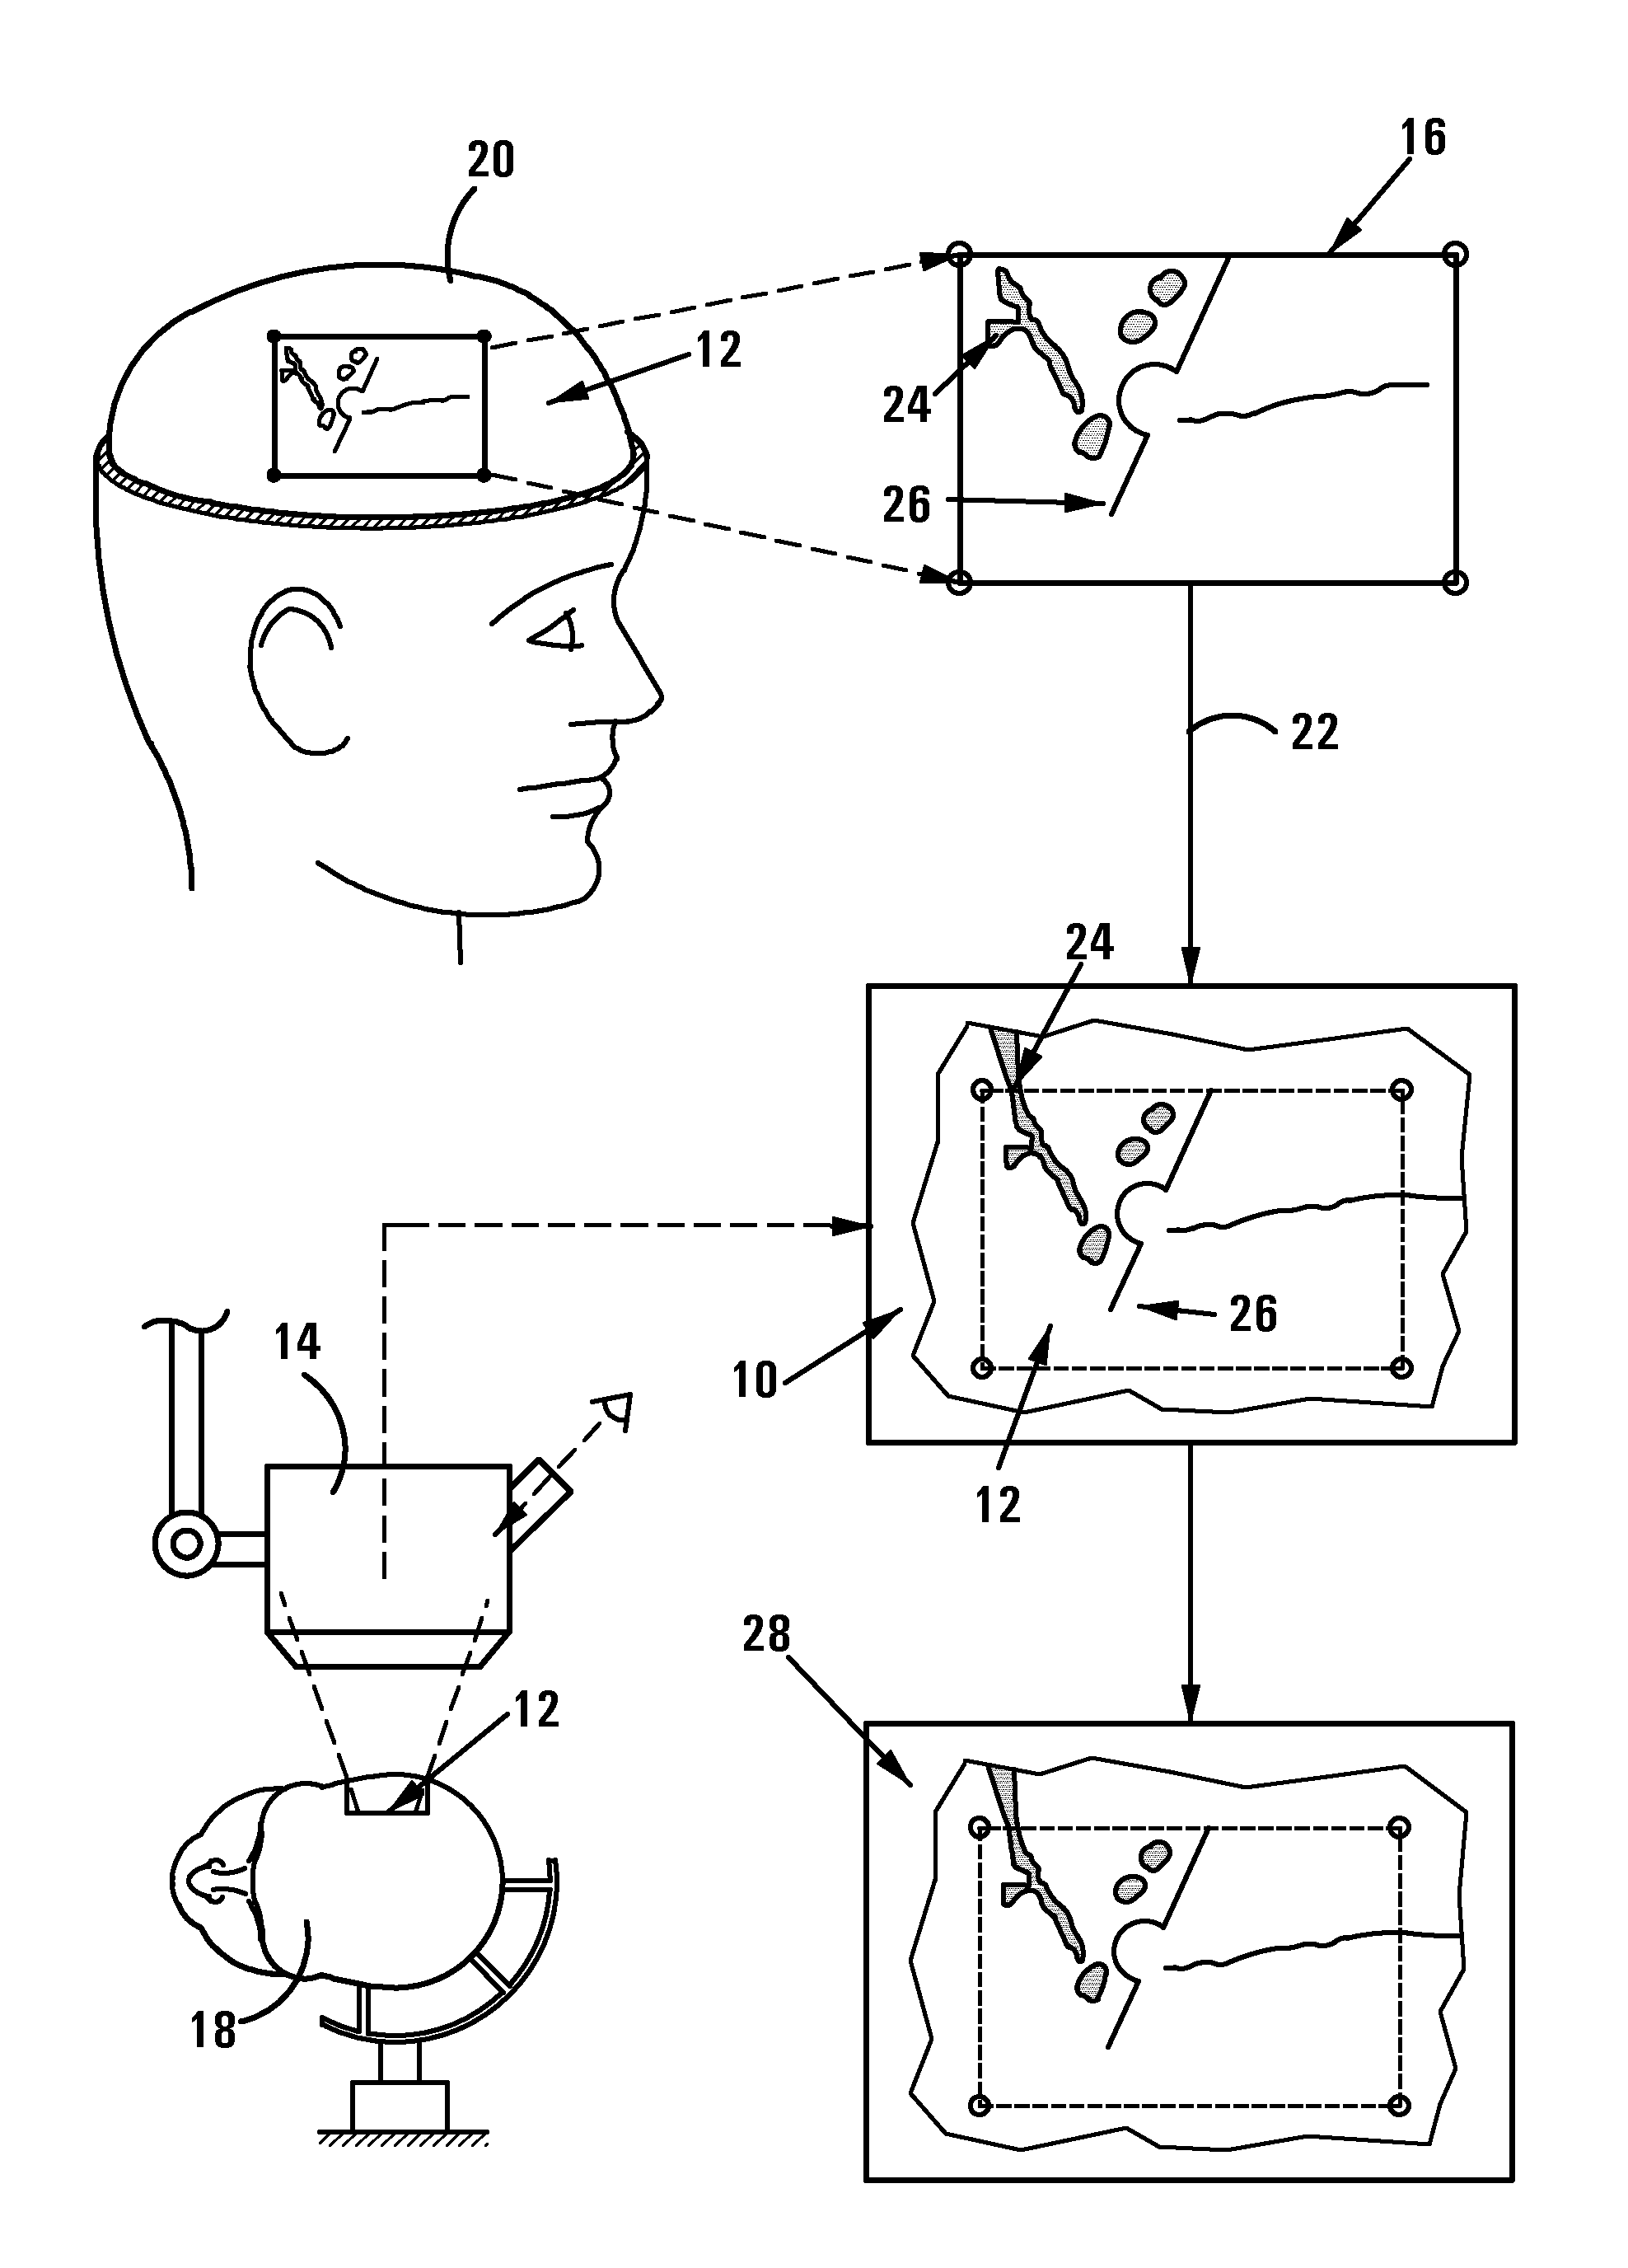 Method of and system for overlaying nbs functional data on a live image of a brain